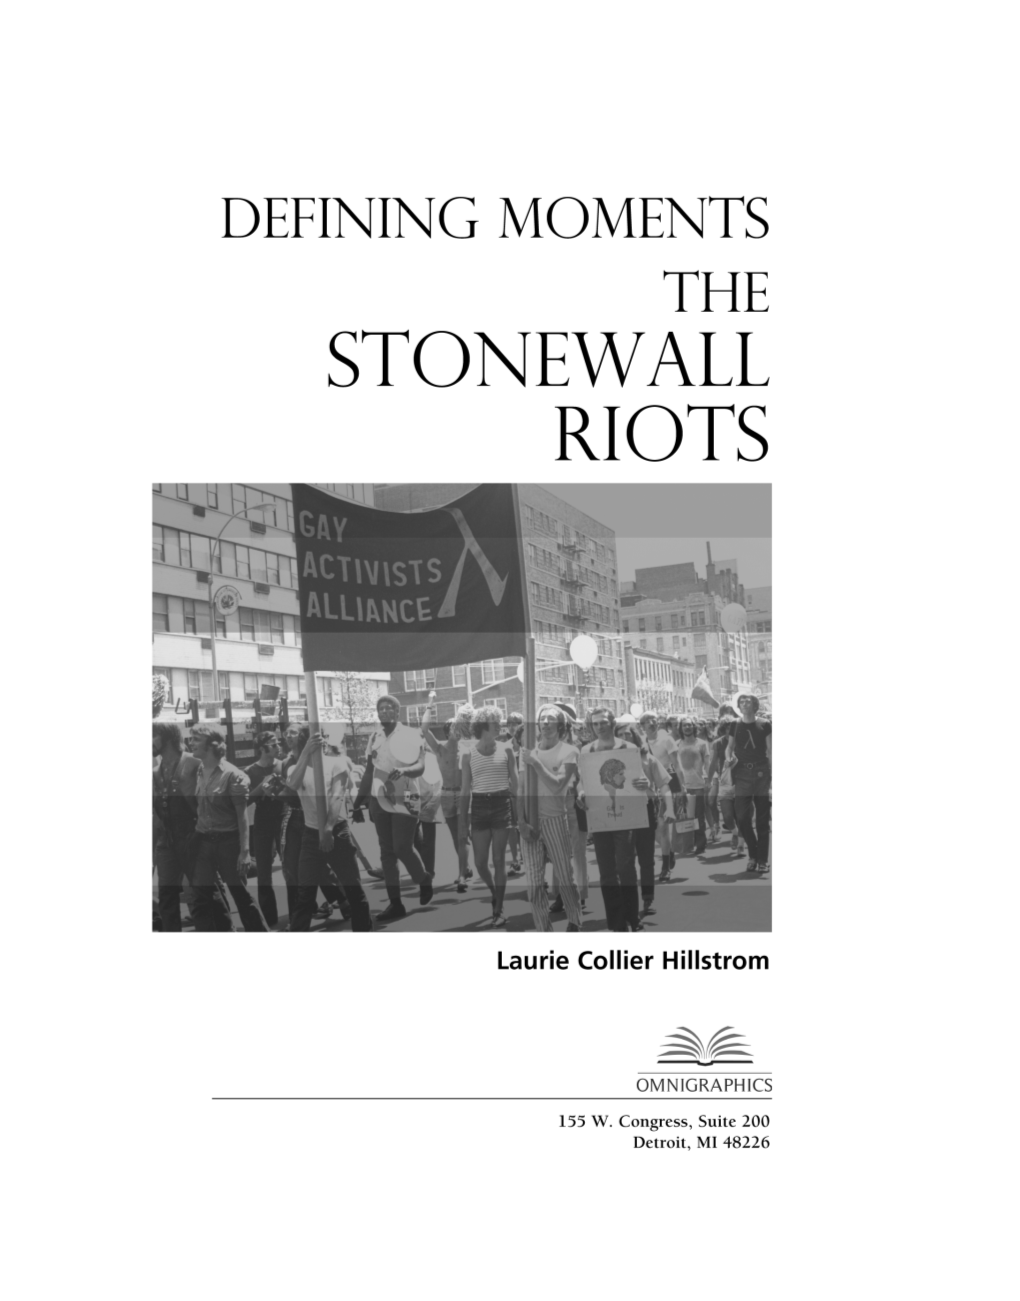 The Stonewall Riots 2/5/16 10:34 PM Page Iii DM - the Stonewall Riots 2/5/16 10:34 PM Page V